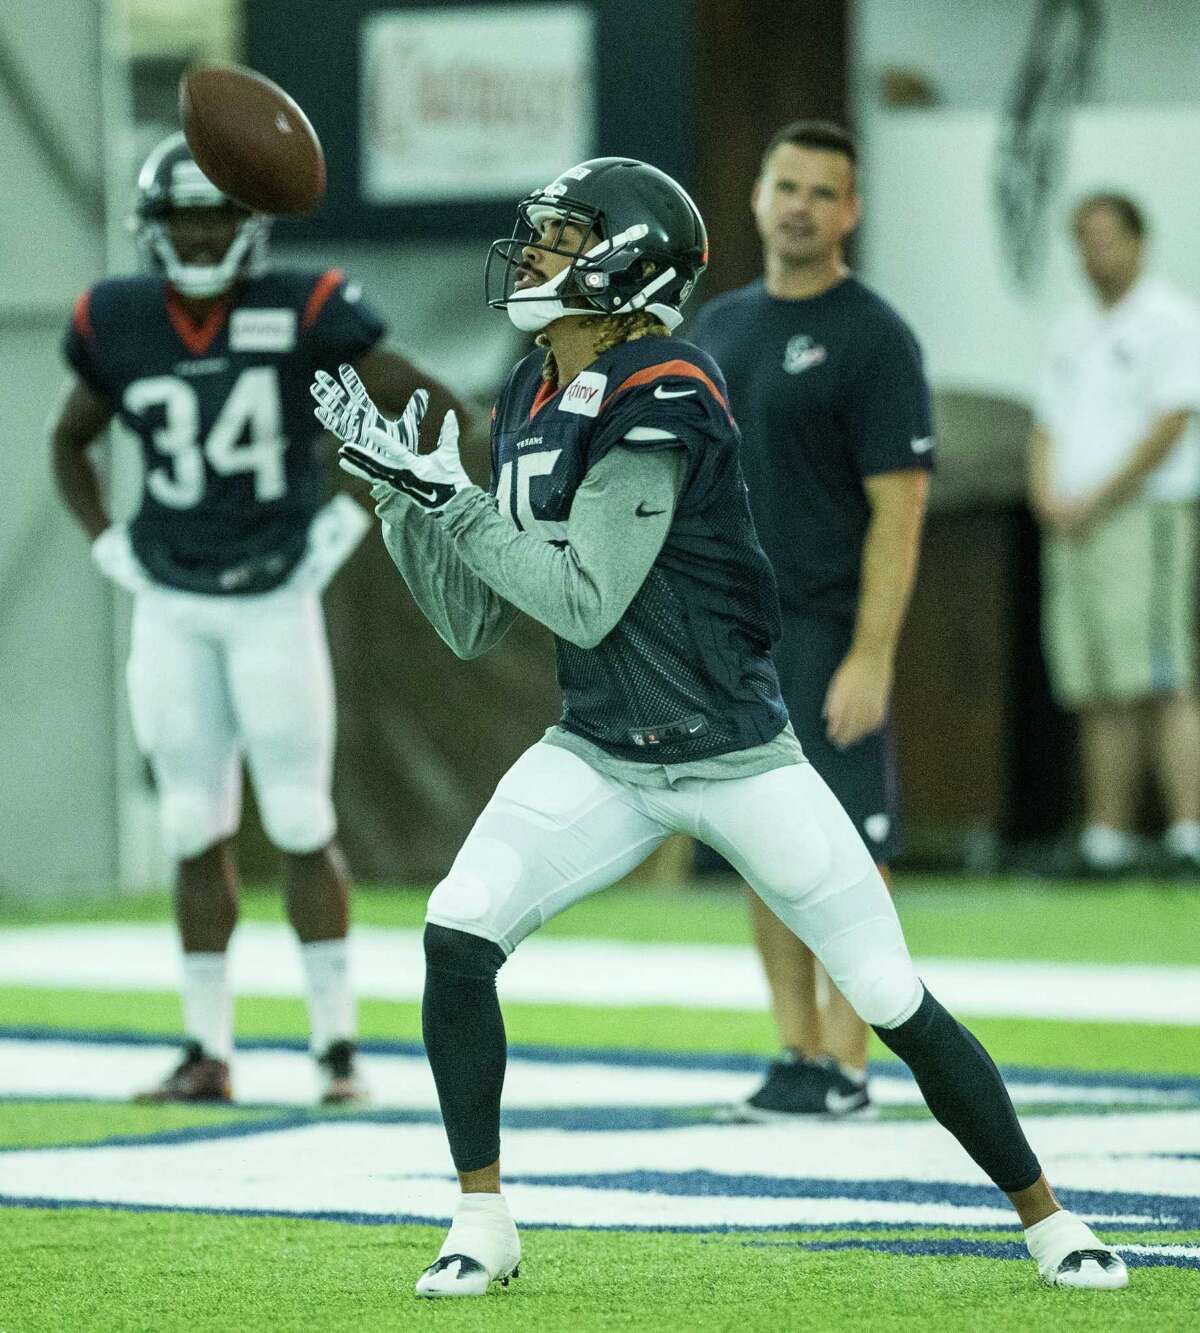 Houston Texans wide receiver Will Fuller receives a kick during Texans training camp at Houston Methodist Training Center on Monday, Aug. 8, 2016, in Houston.